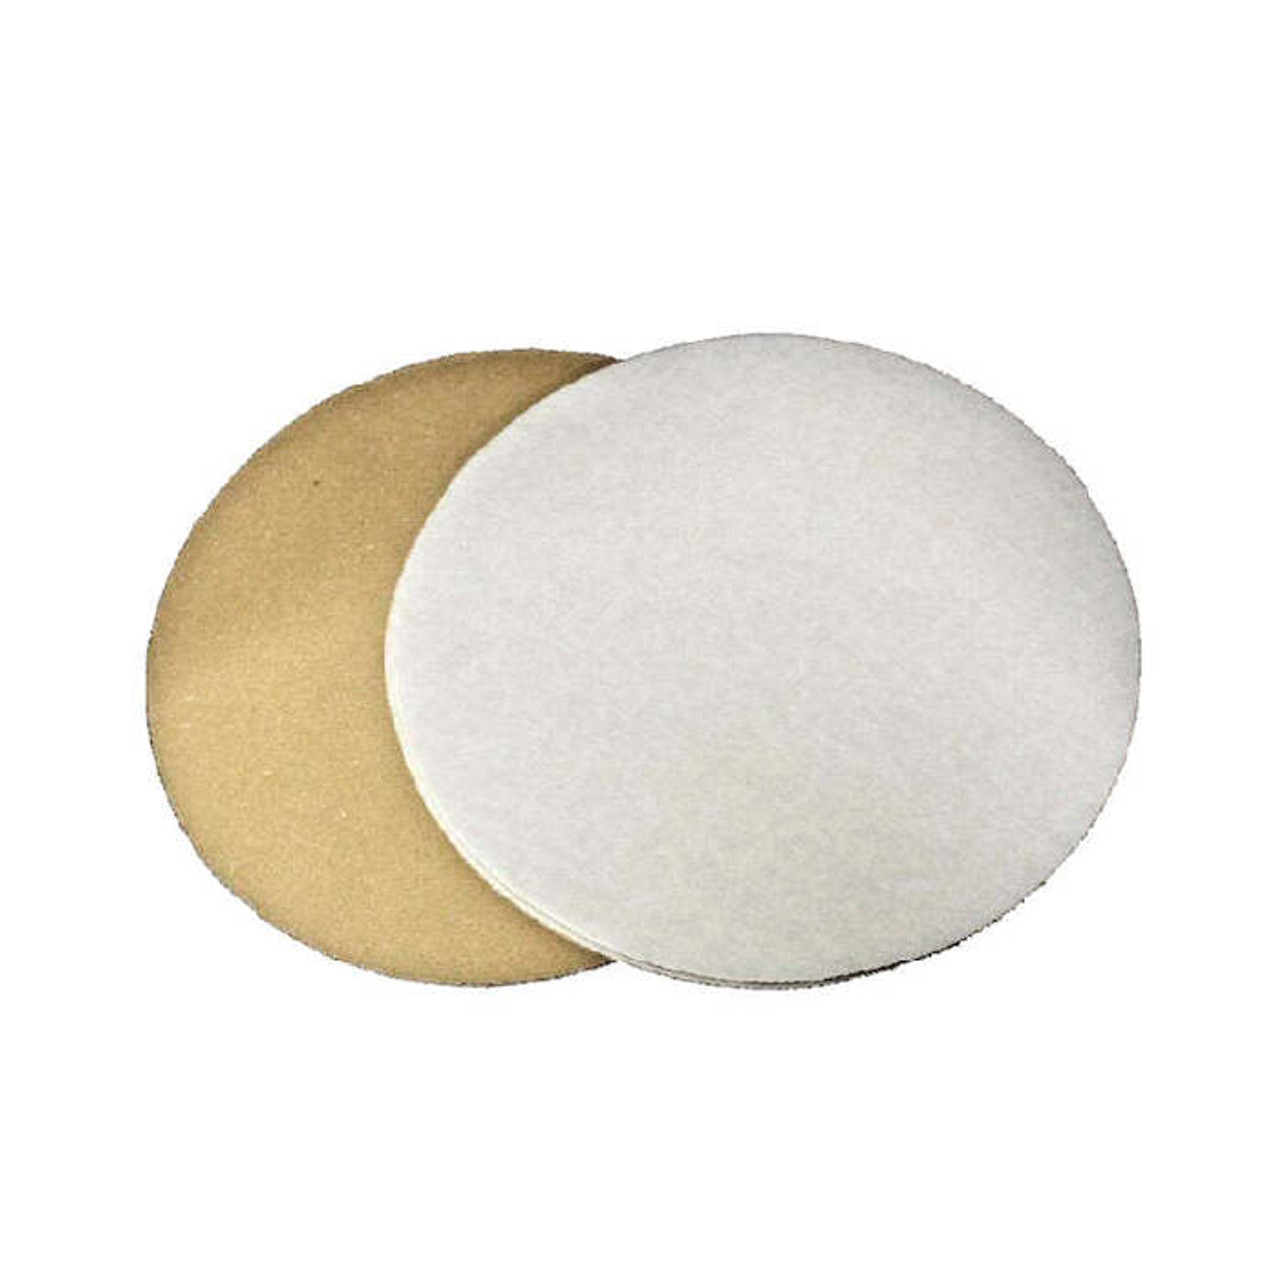 10"Corrugated cardboard pizza Discs or Cake bases ( see quantiy options )